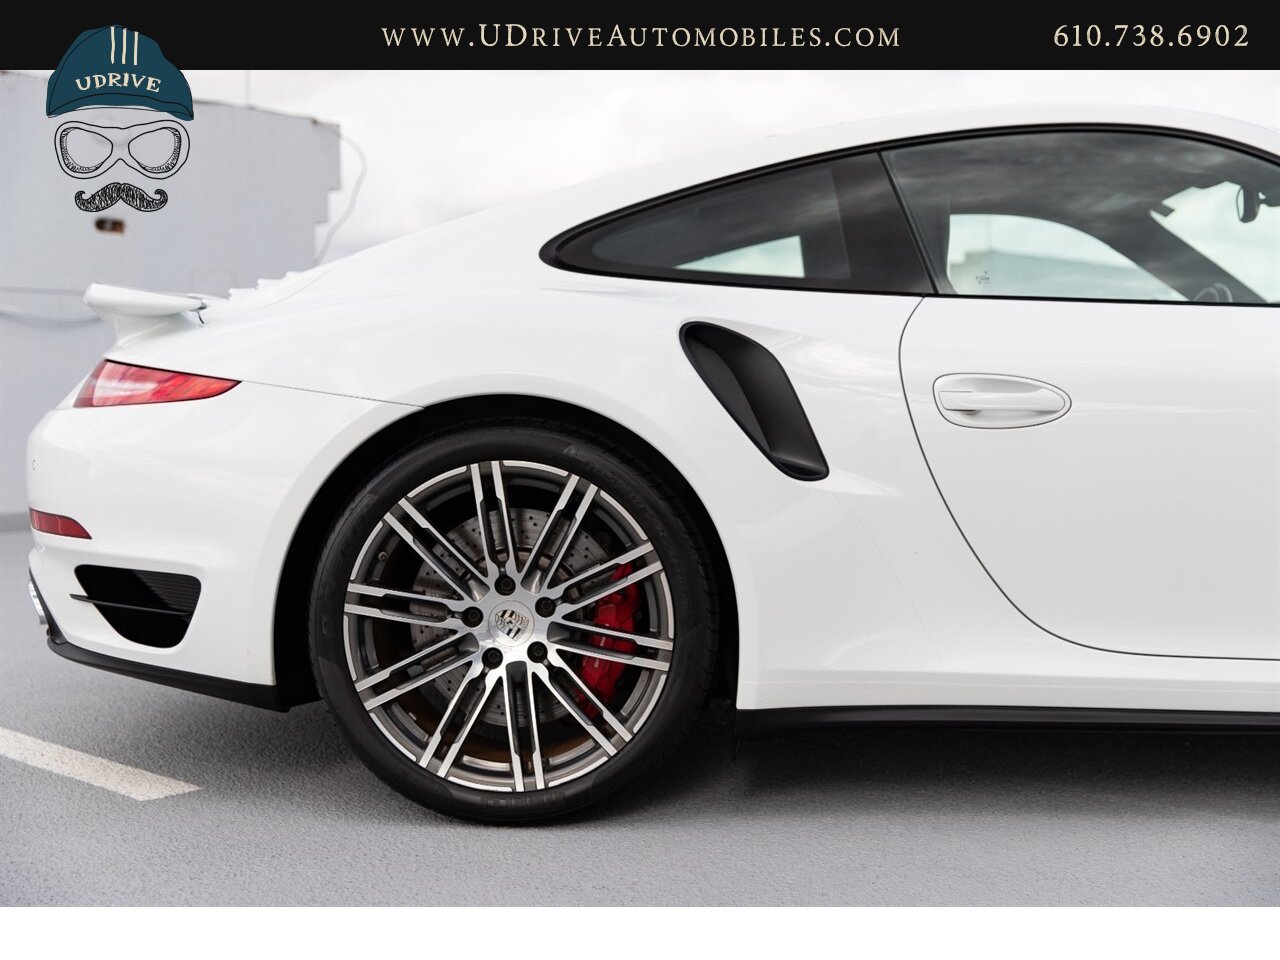 2014 Porsche 911 Turbo 12k Miles White over Black Chrono Rear Wiper  Sport Seats 20in Turbo Whls Sunroof Red Belts - Photo 16 - West Chester, PA 19382